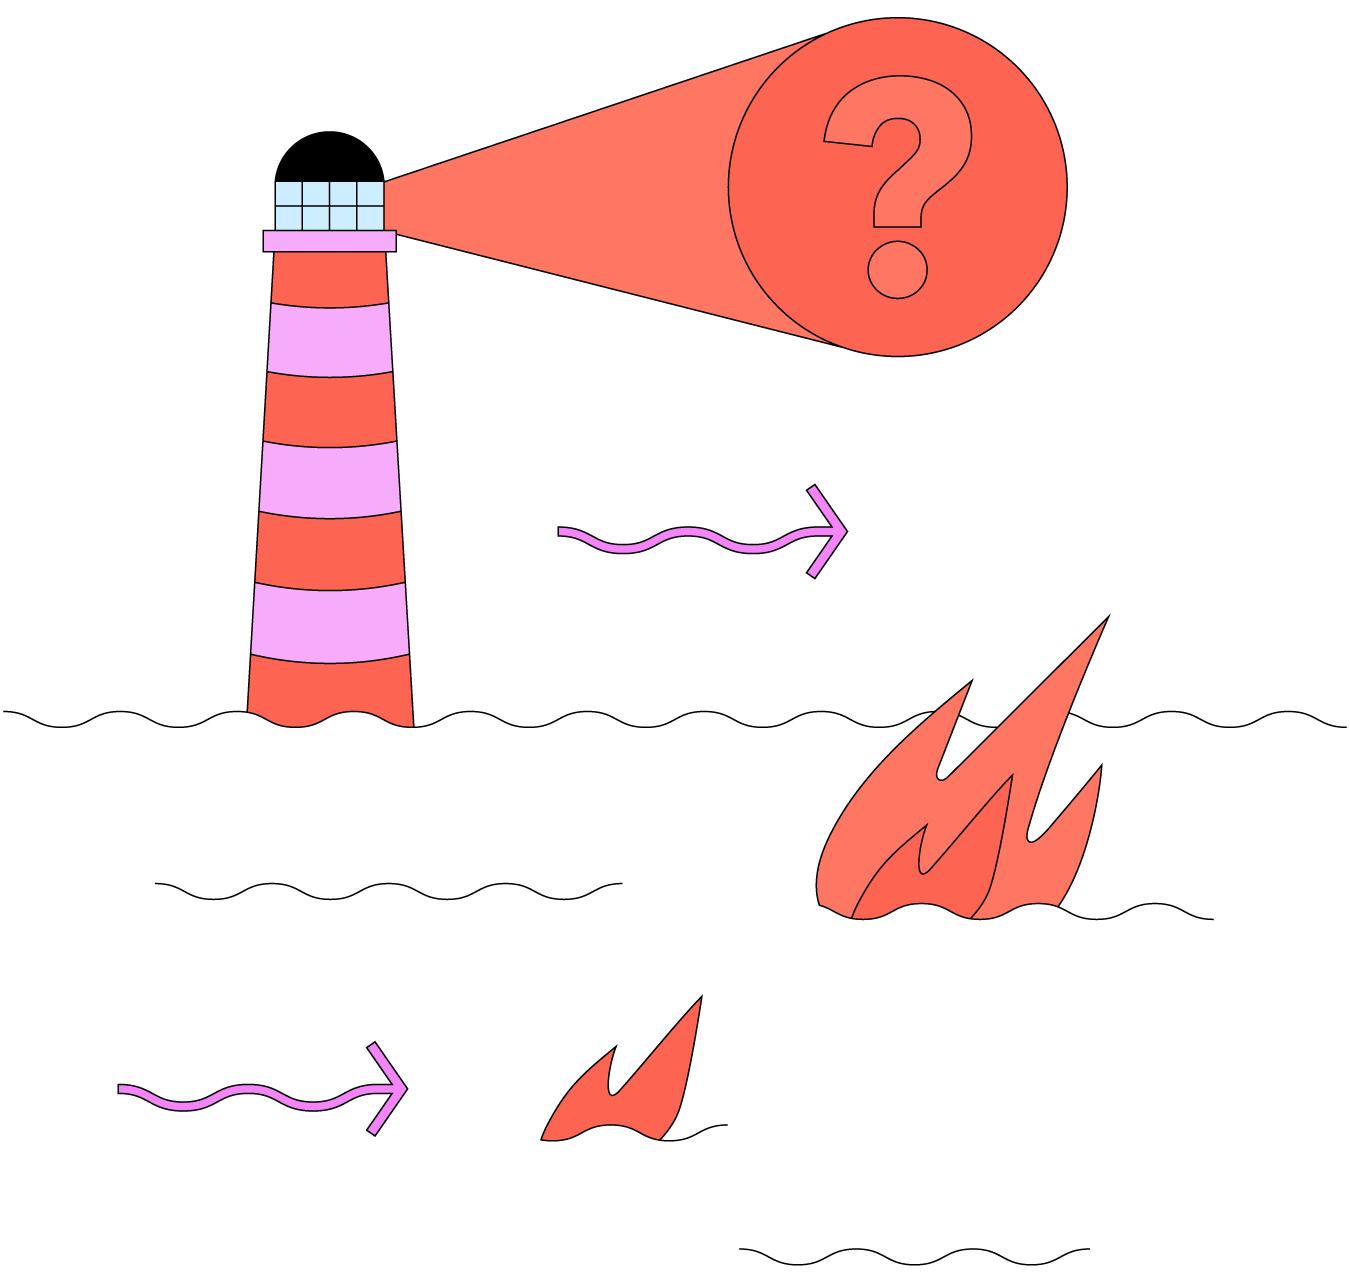 Cartoon graphic of a lighthouse in the ocean. Fire erupts from the water, alluding to a climate disaster